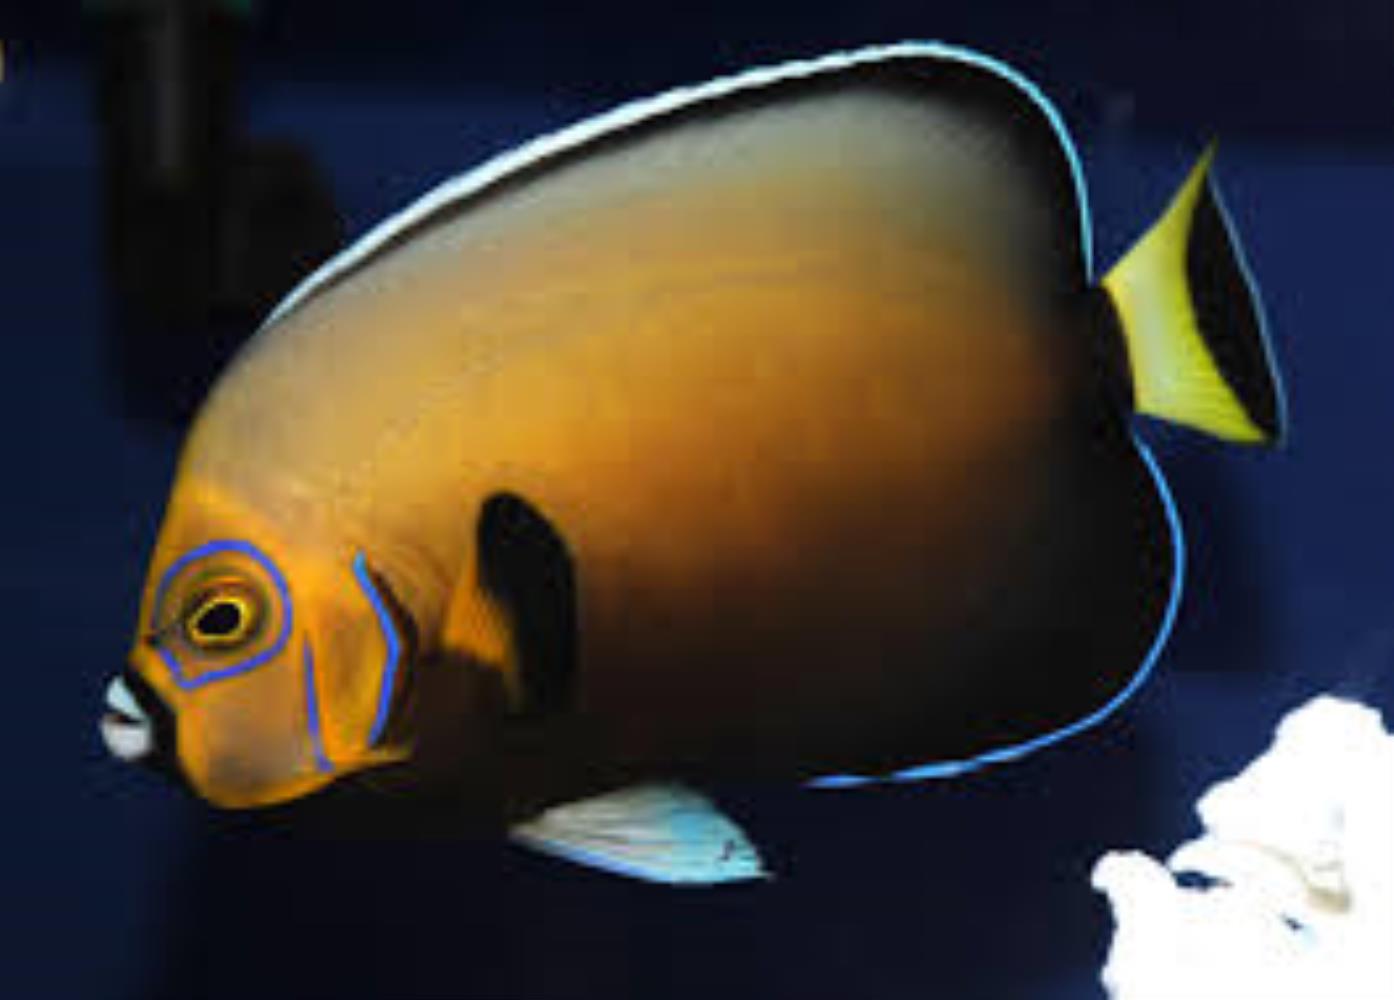 Conspicuous Angelfish